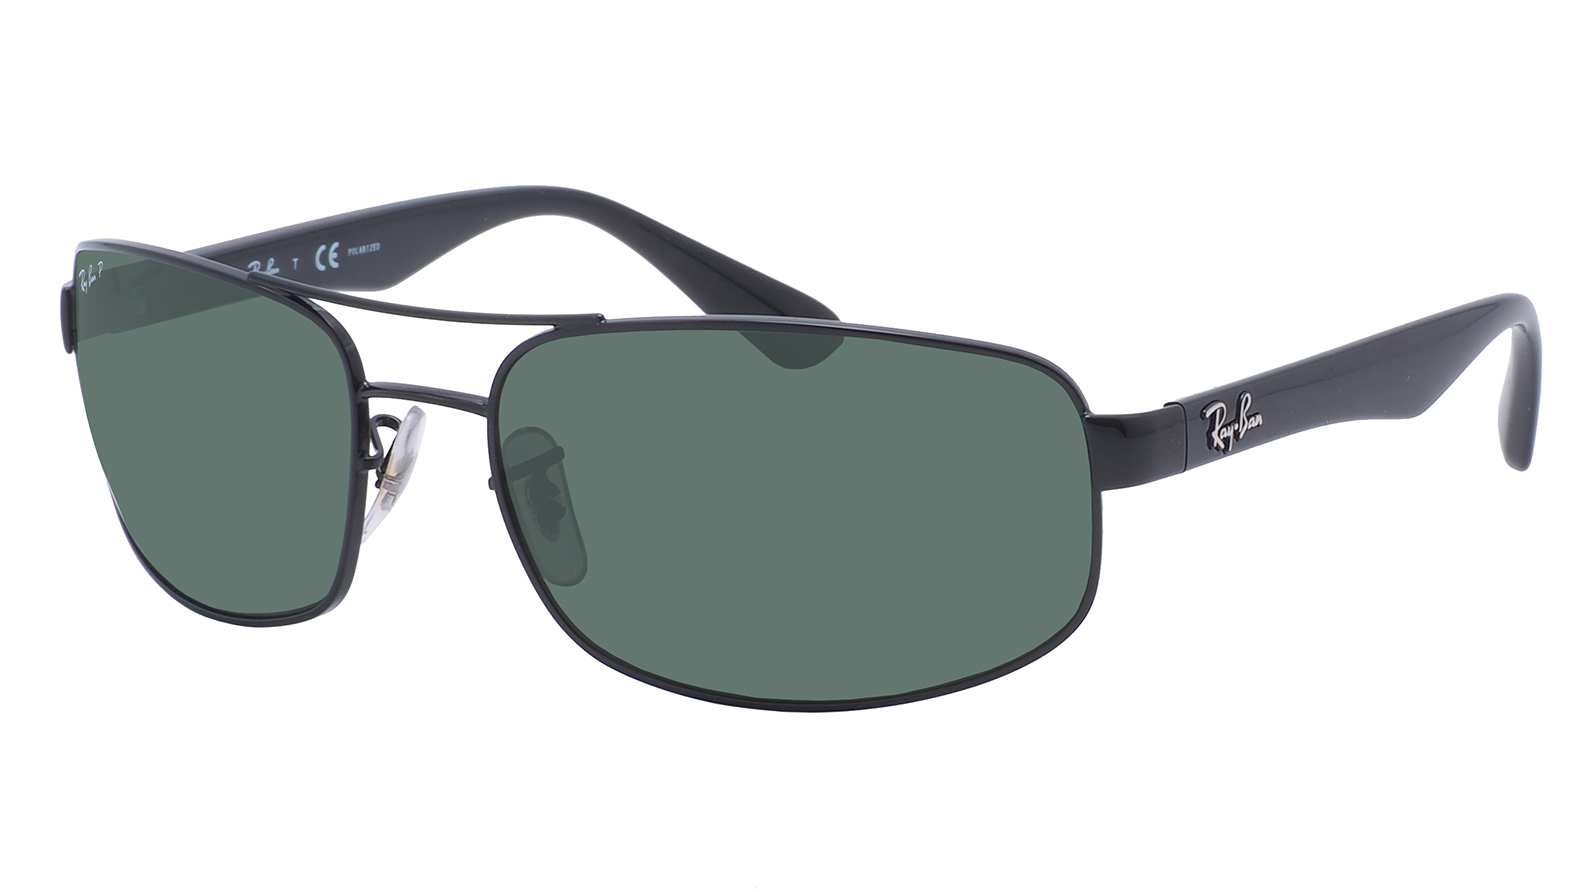 Ray-Ban Active Lifestyle RB 3445 002/58 ray ban active lifestyle rb 3457 917071